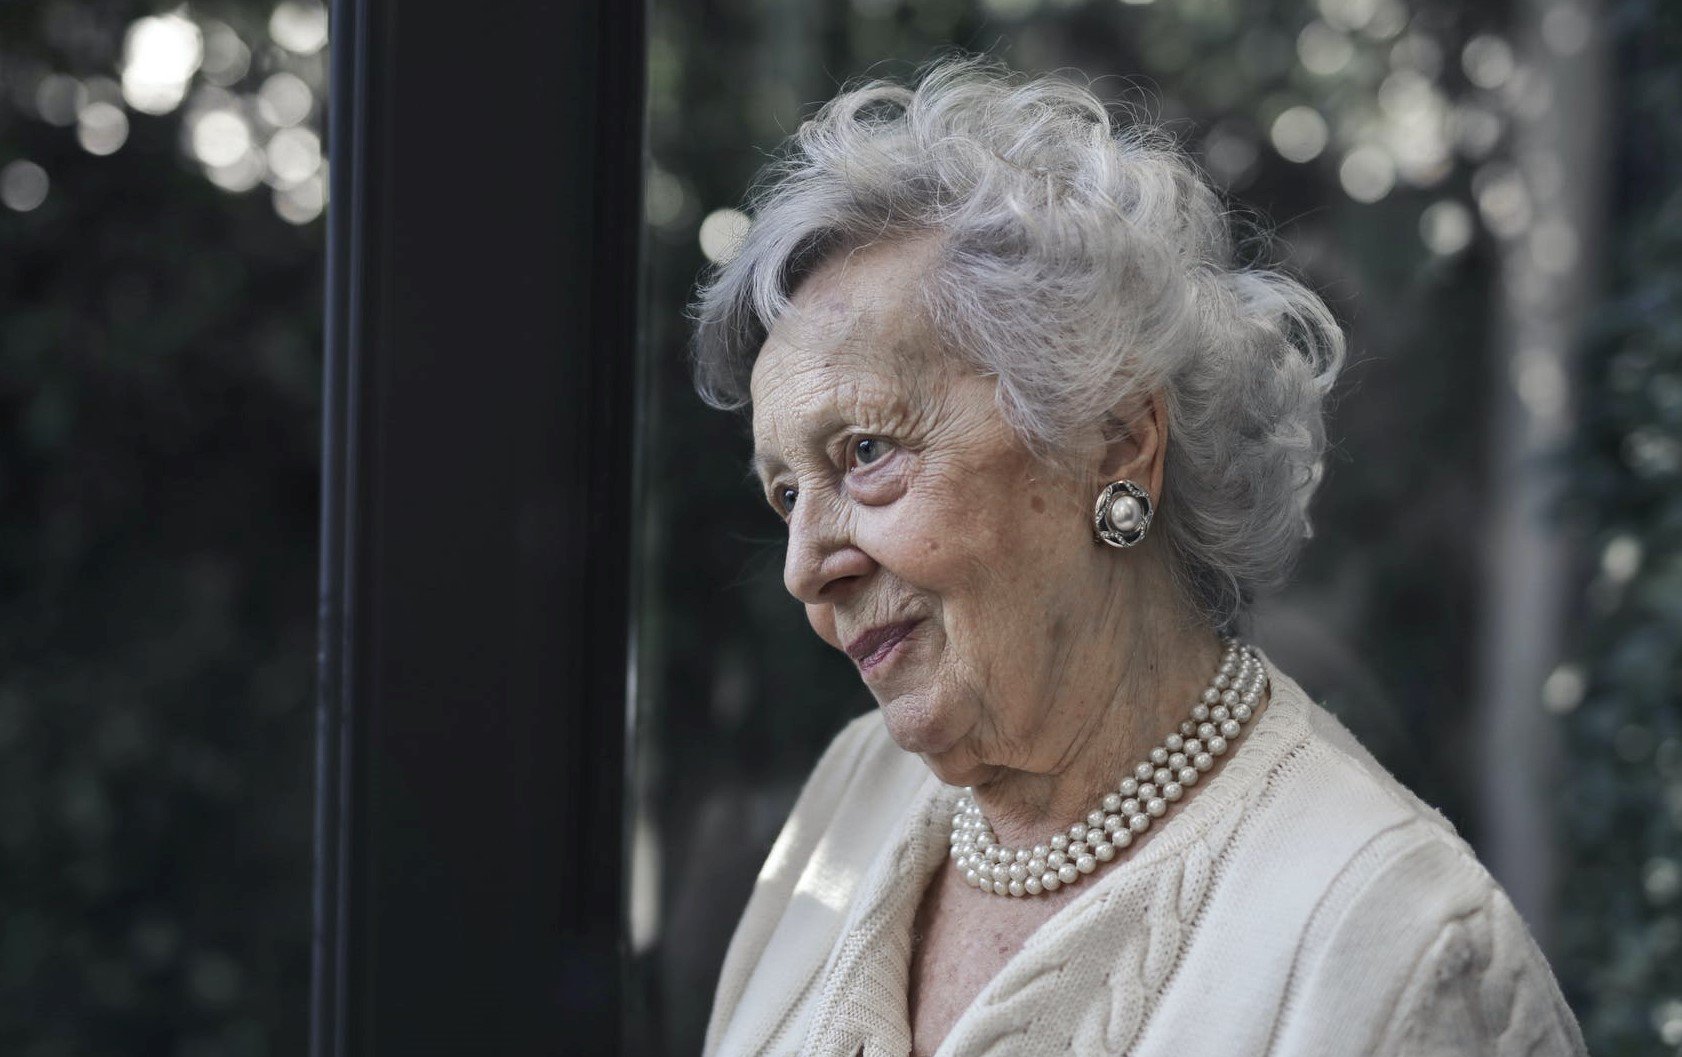 A frail old lady opened the door | Source: Pexels